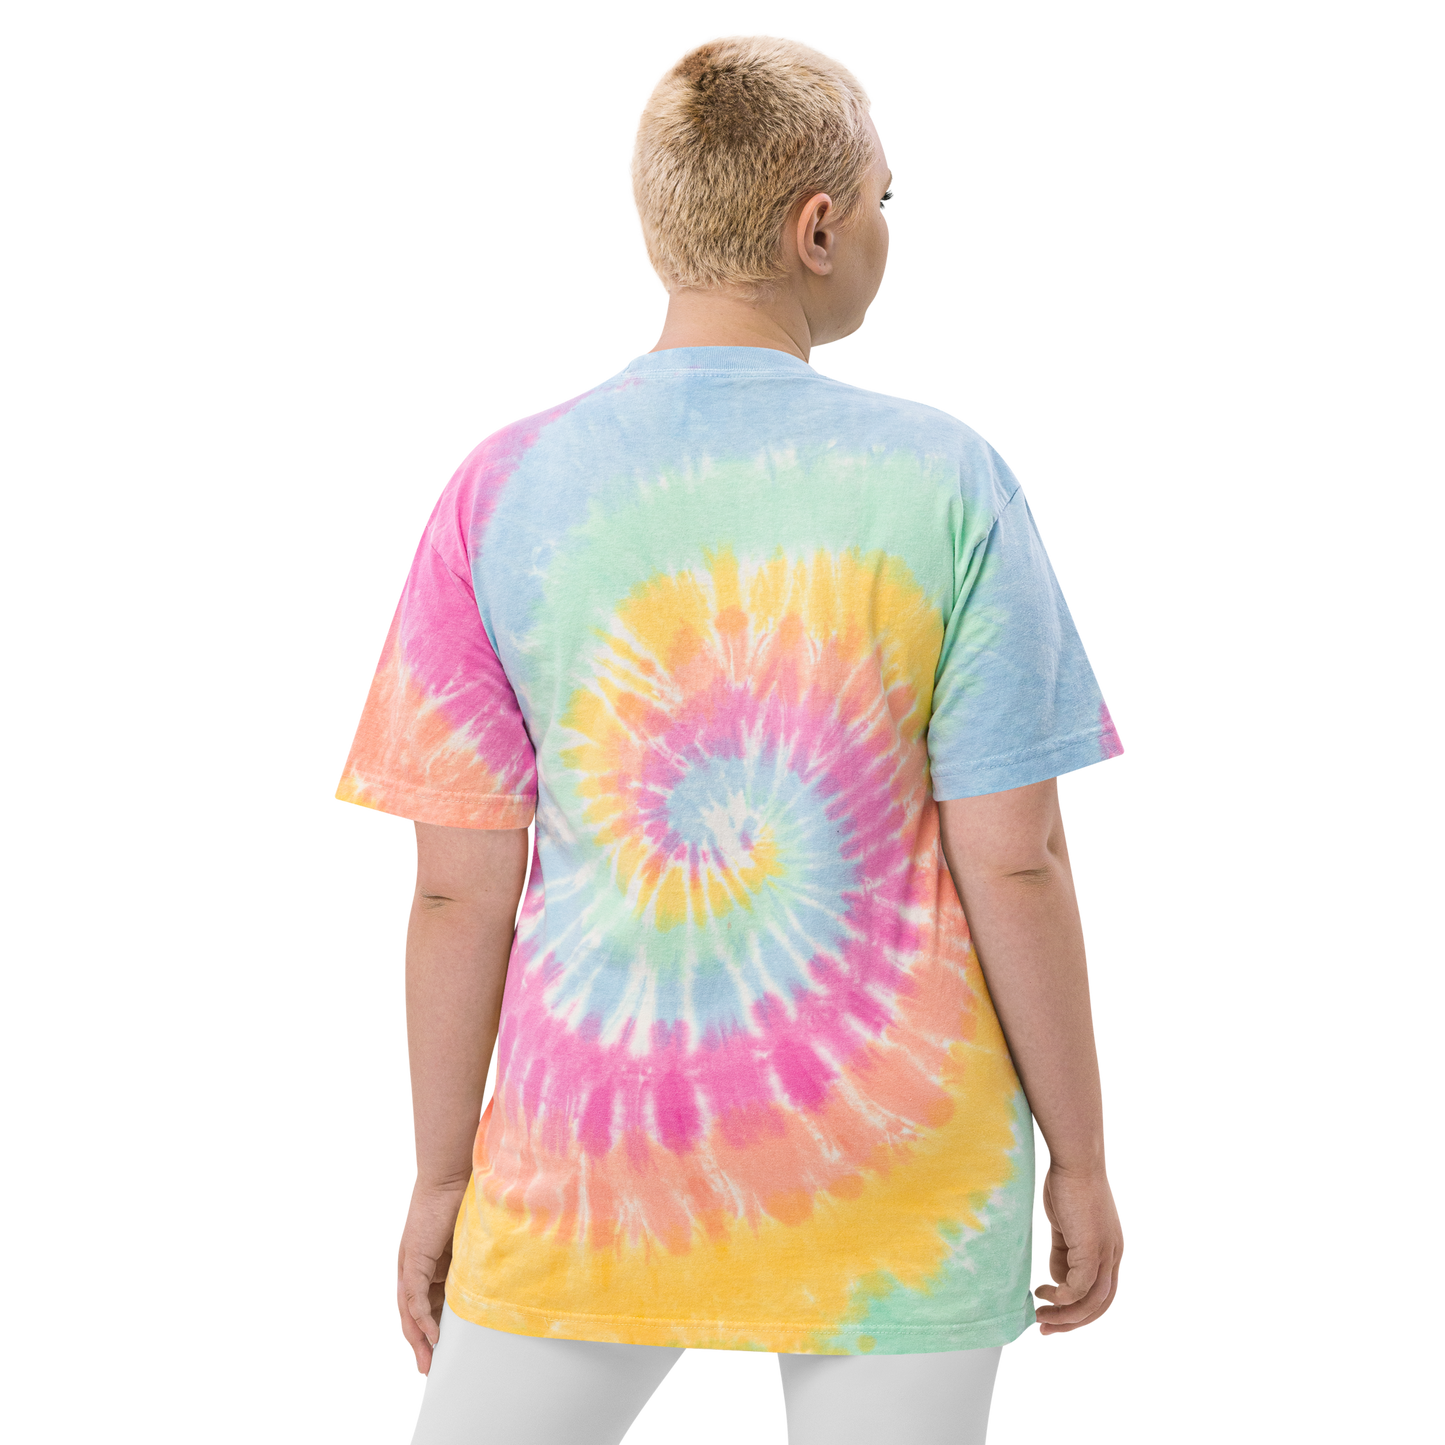 Crossed-X Oversized Tie-Dye T-Shirt • YVR Vancouver • YHM Designs - Image 12